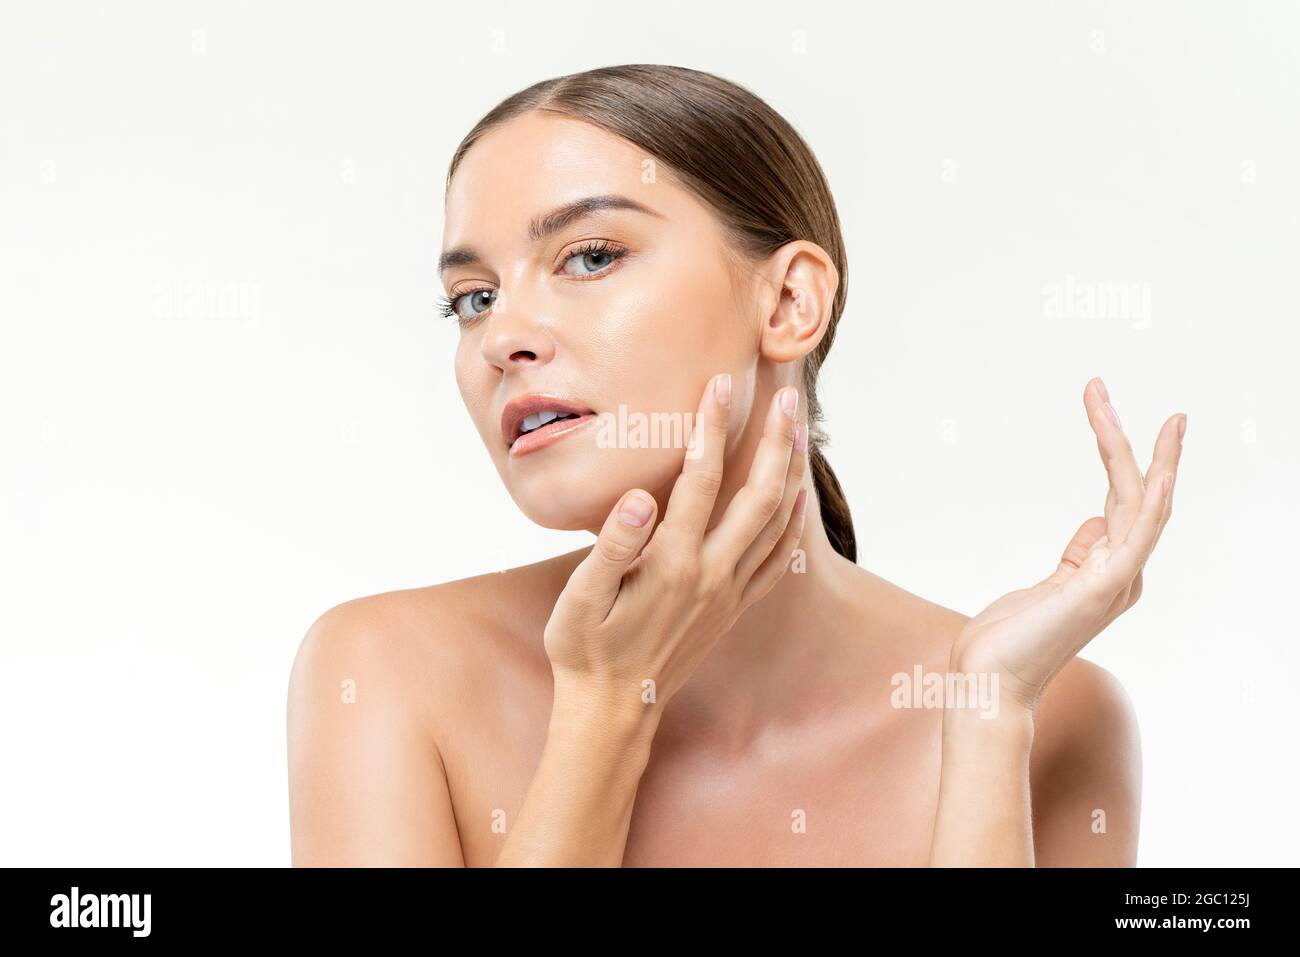 Beauty shot of caucasian woman with youthful fresh clear wrinkle free face skin in isolated studio white background Stock Photo